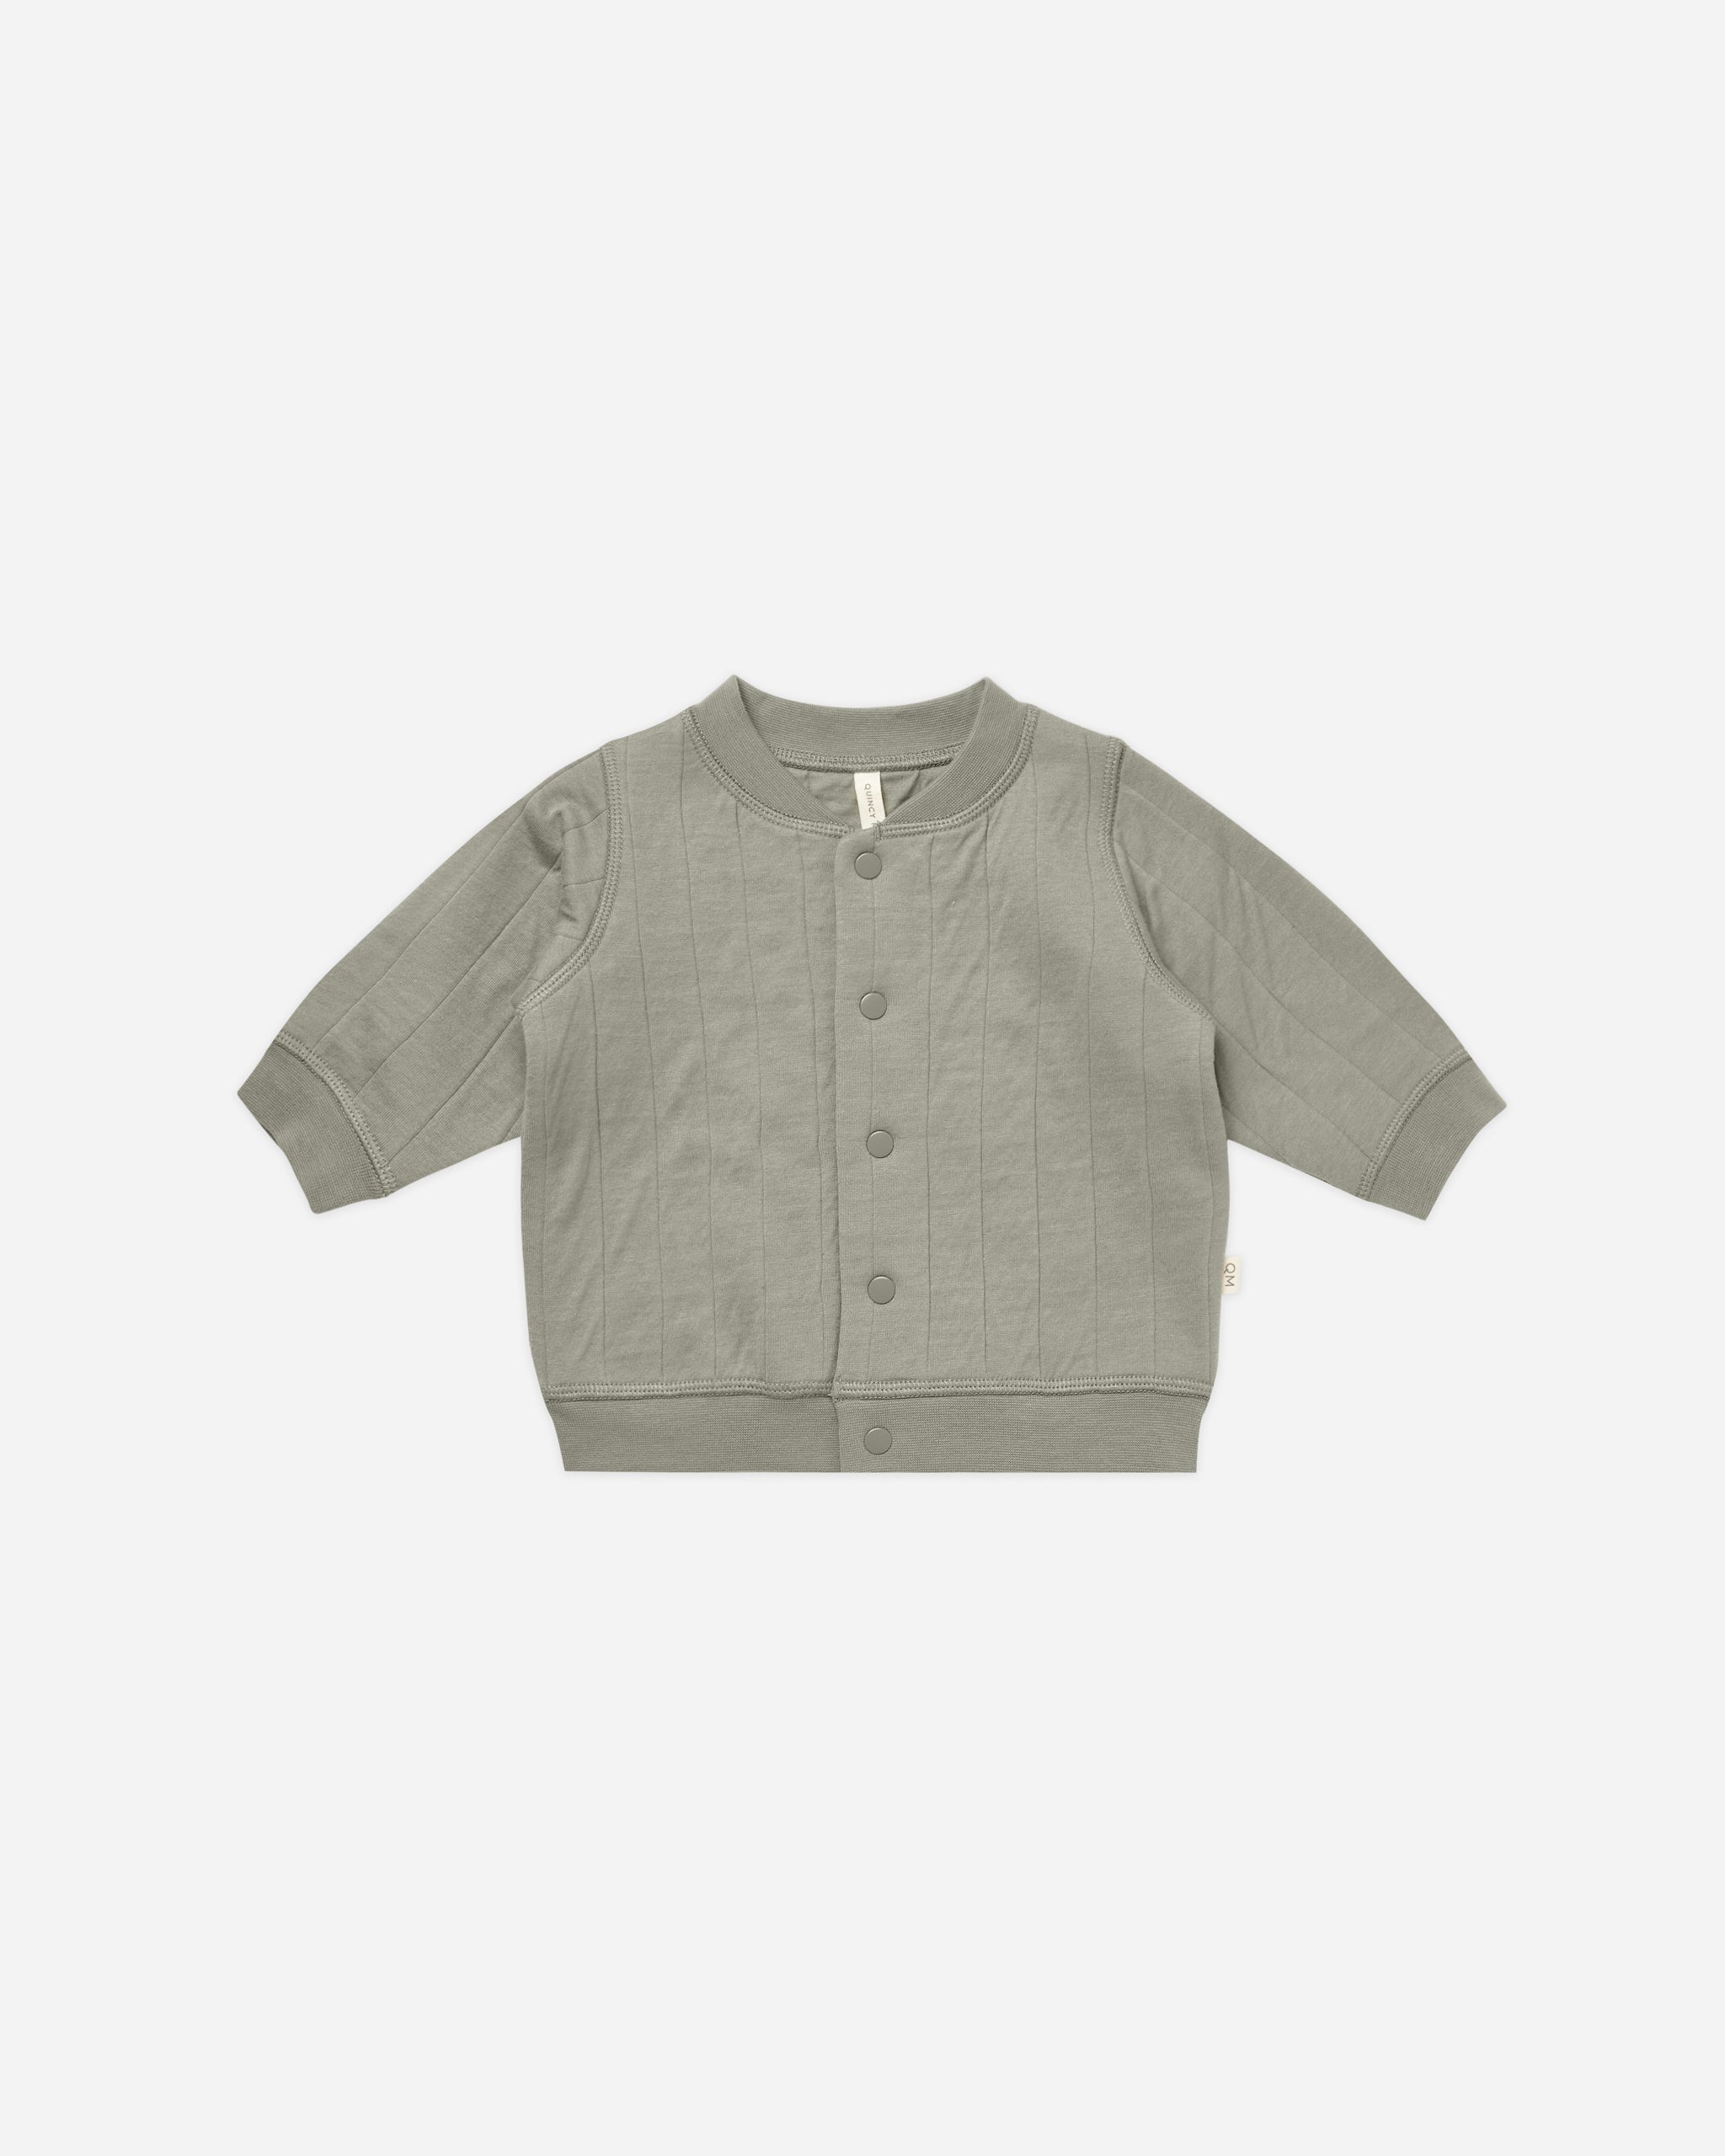 Cody Jacket || Basil - Rylee + Cru | Kids Clothes | Trendy Baby Clothes | Modern Infant Outfits |